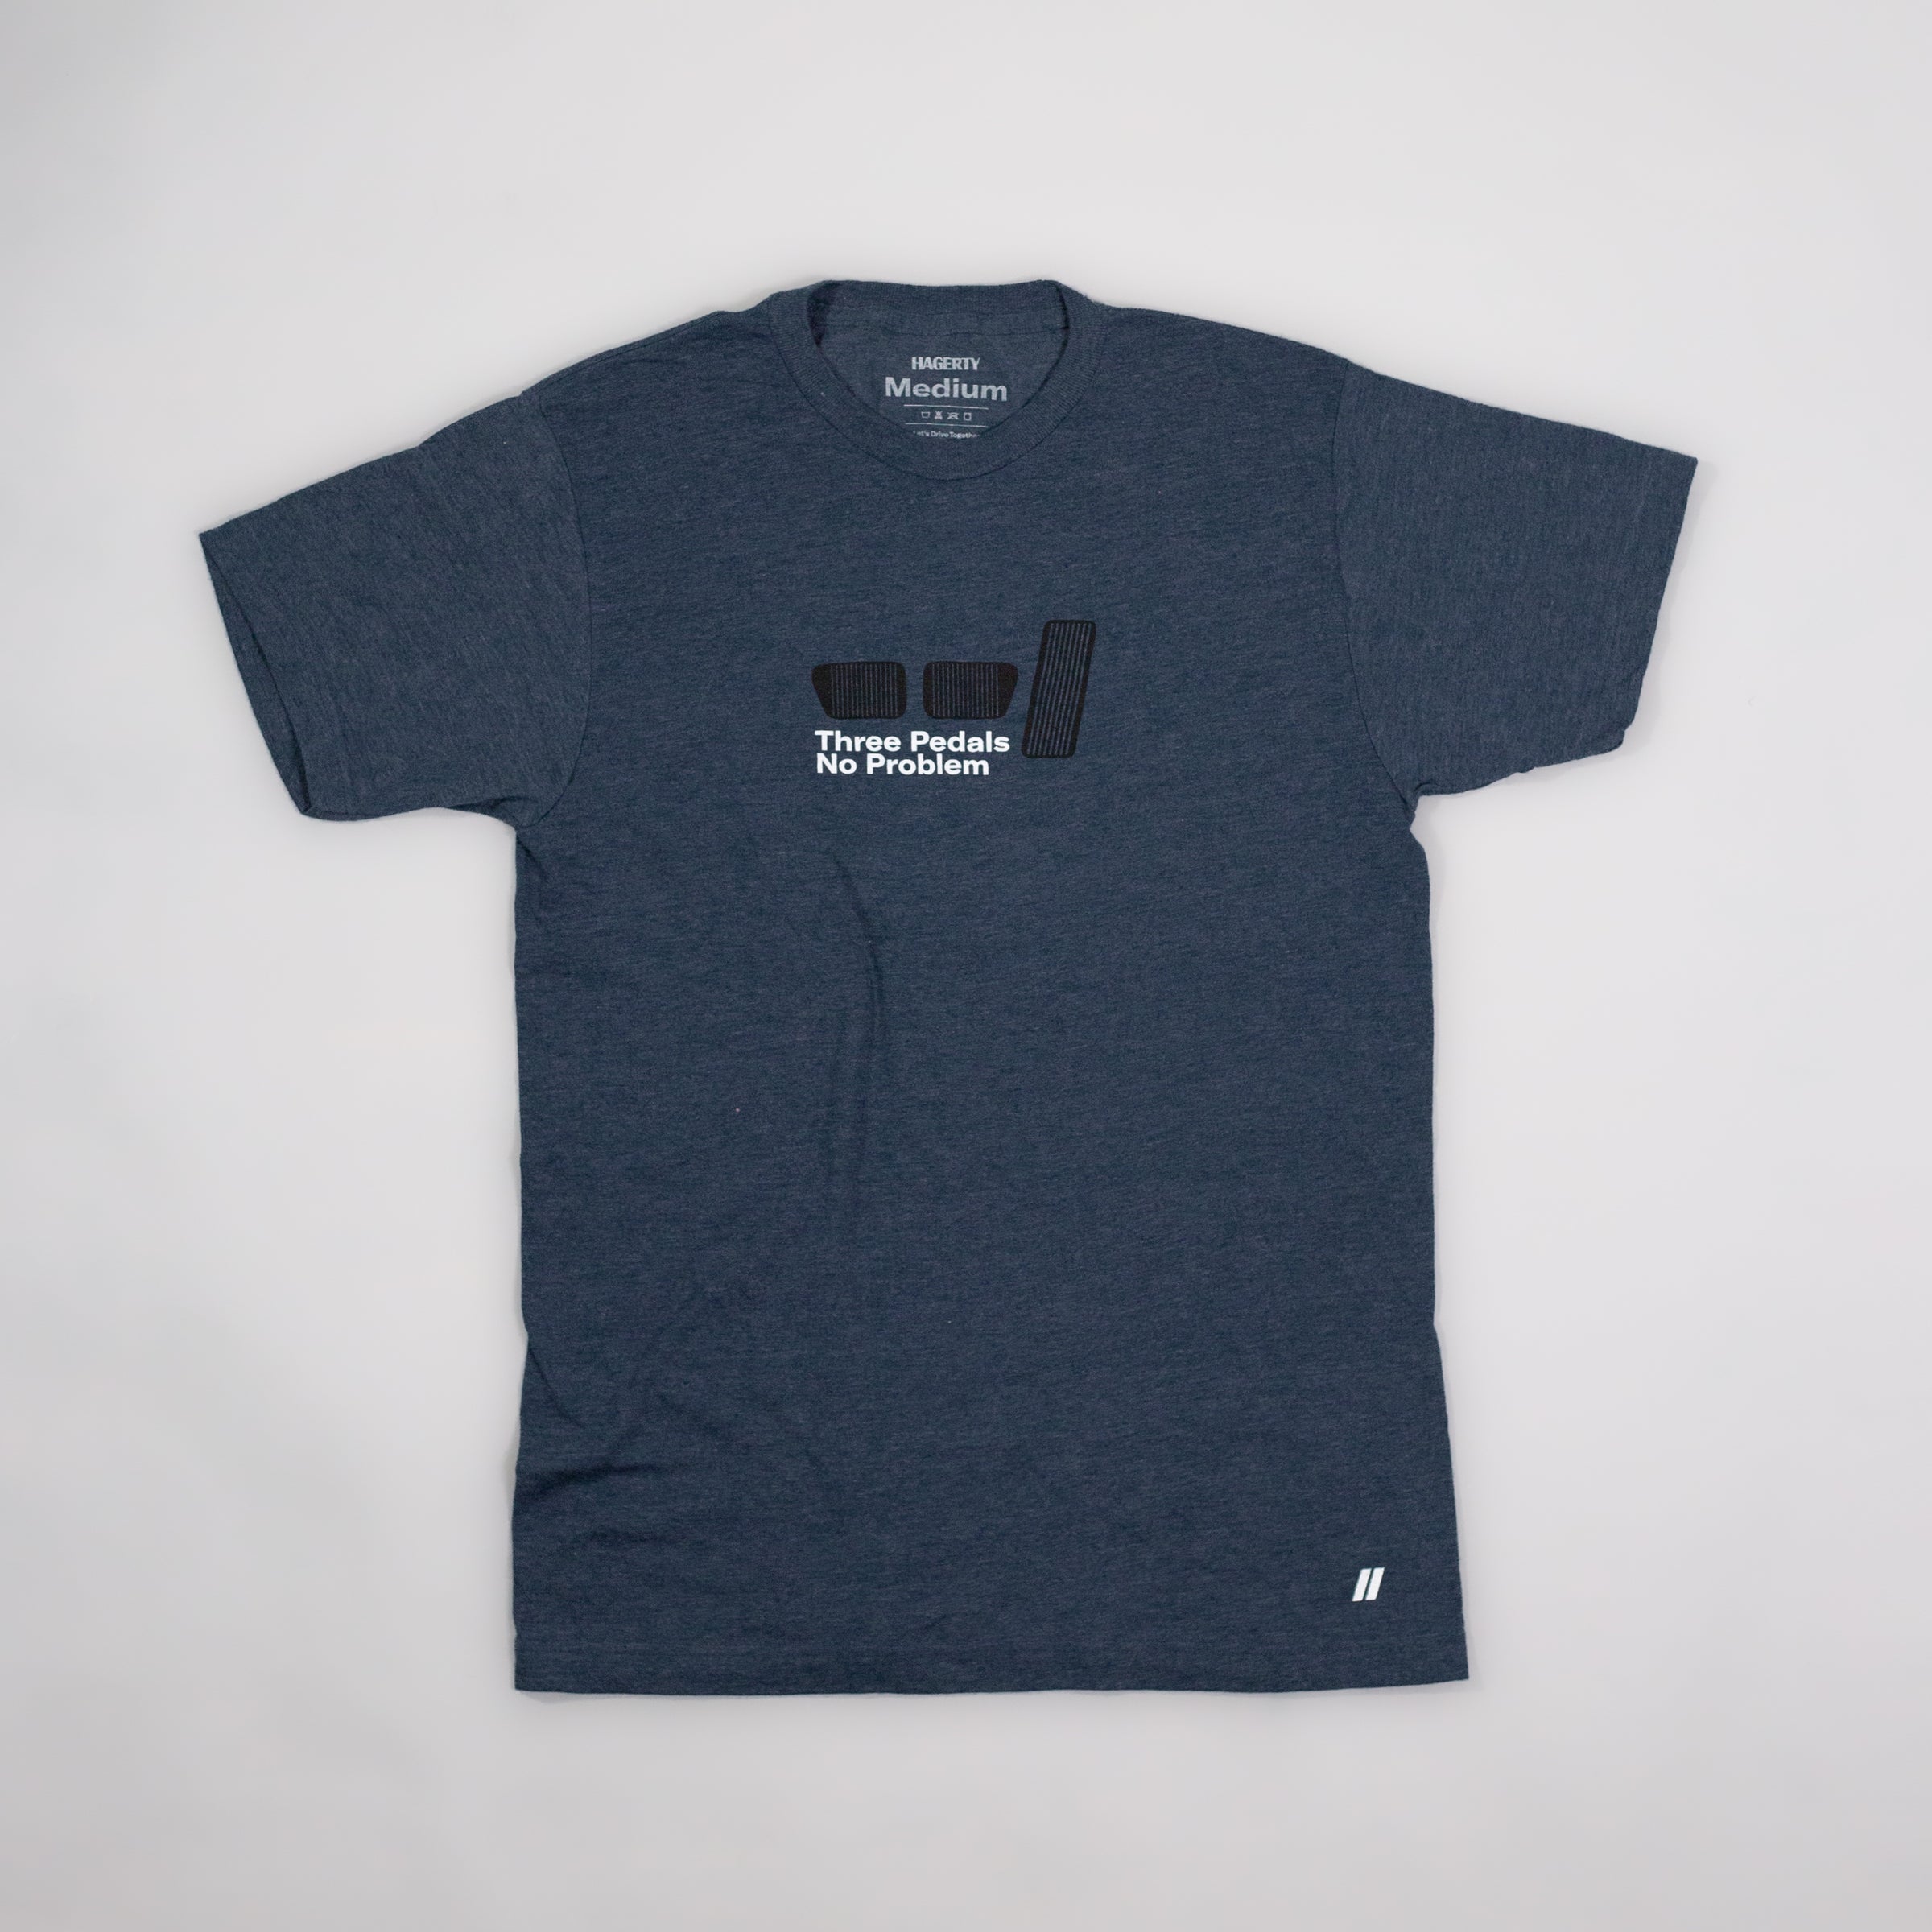 Hagerty T-Shirt | The Shop by Hagerty